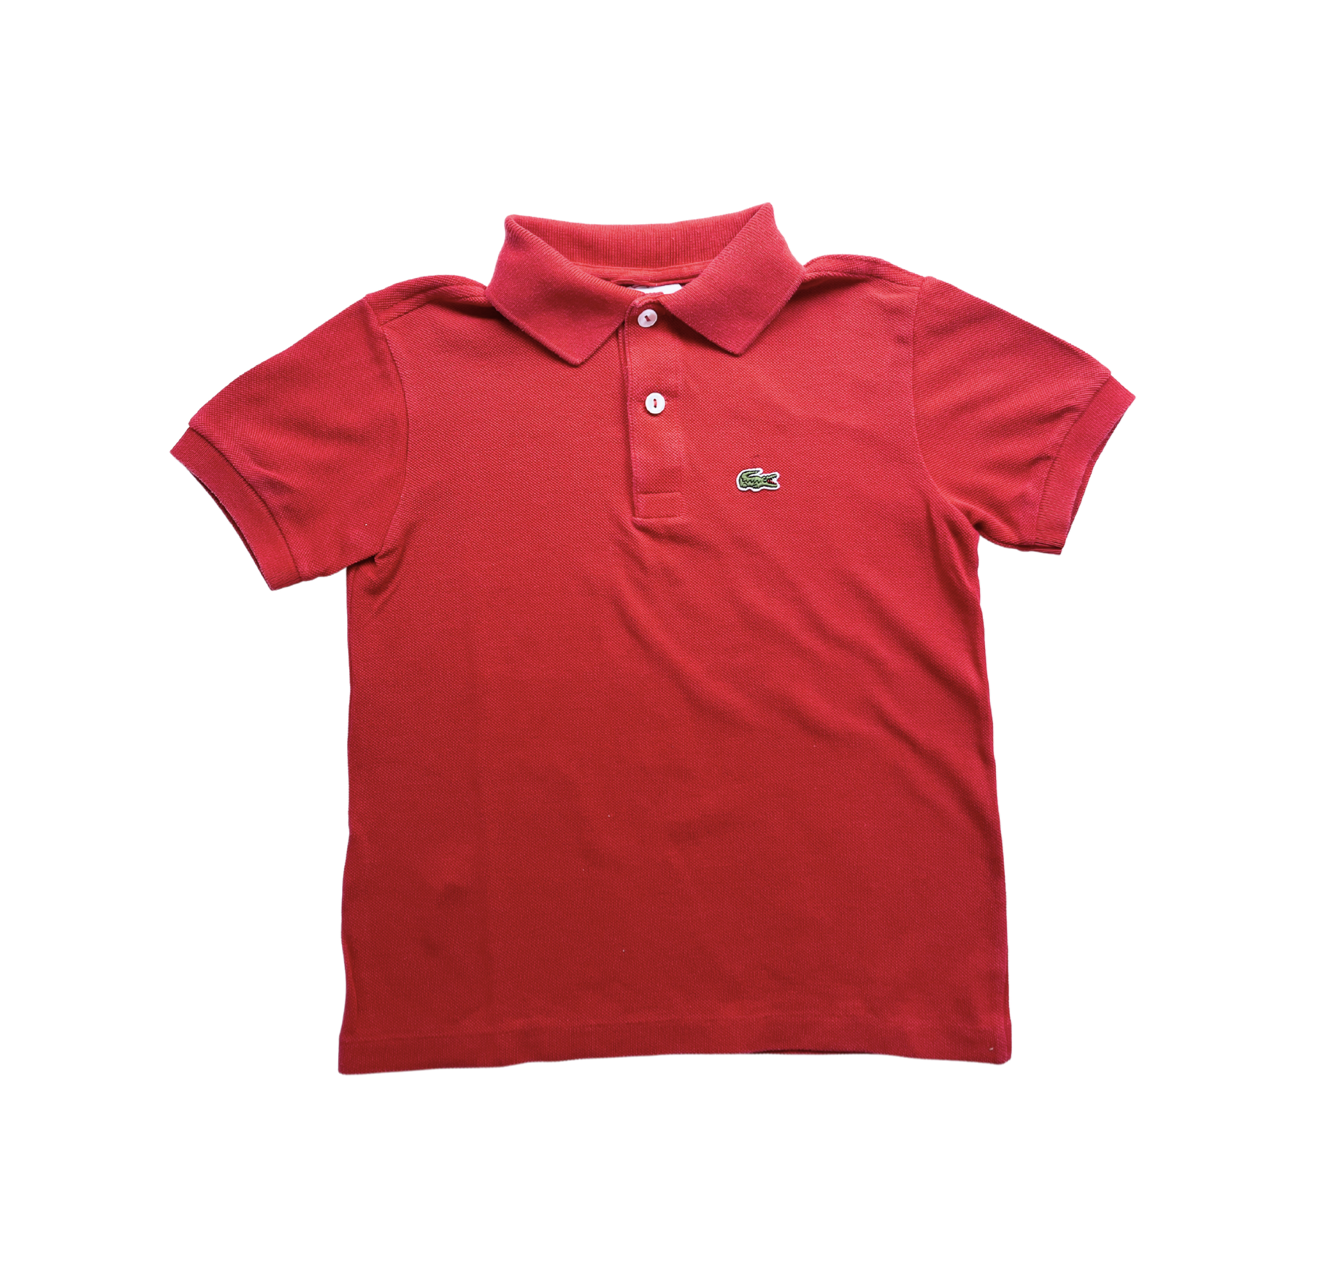 LACOSTE - Polo rouge - 8 ans